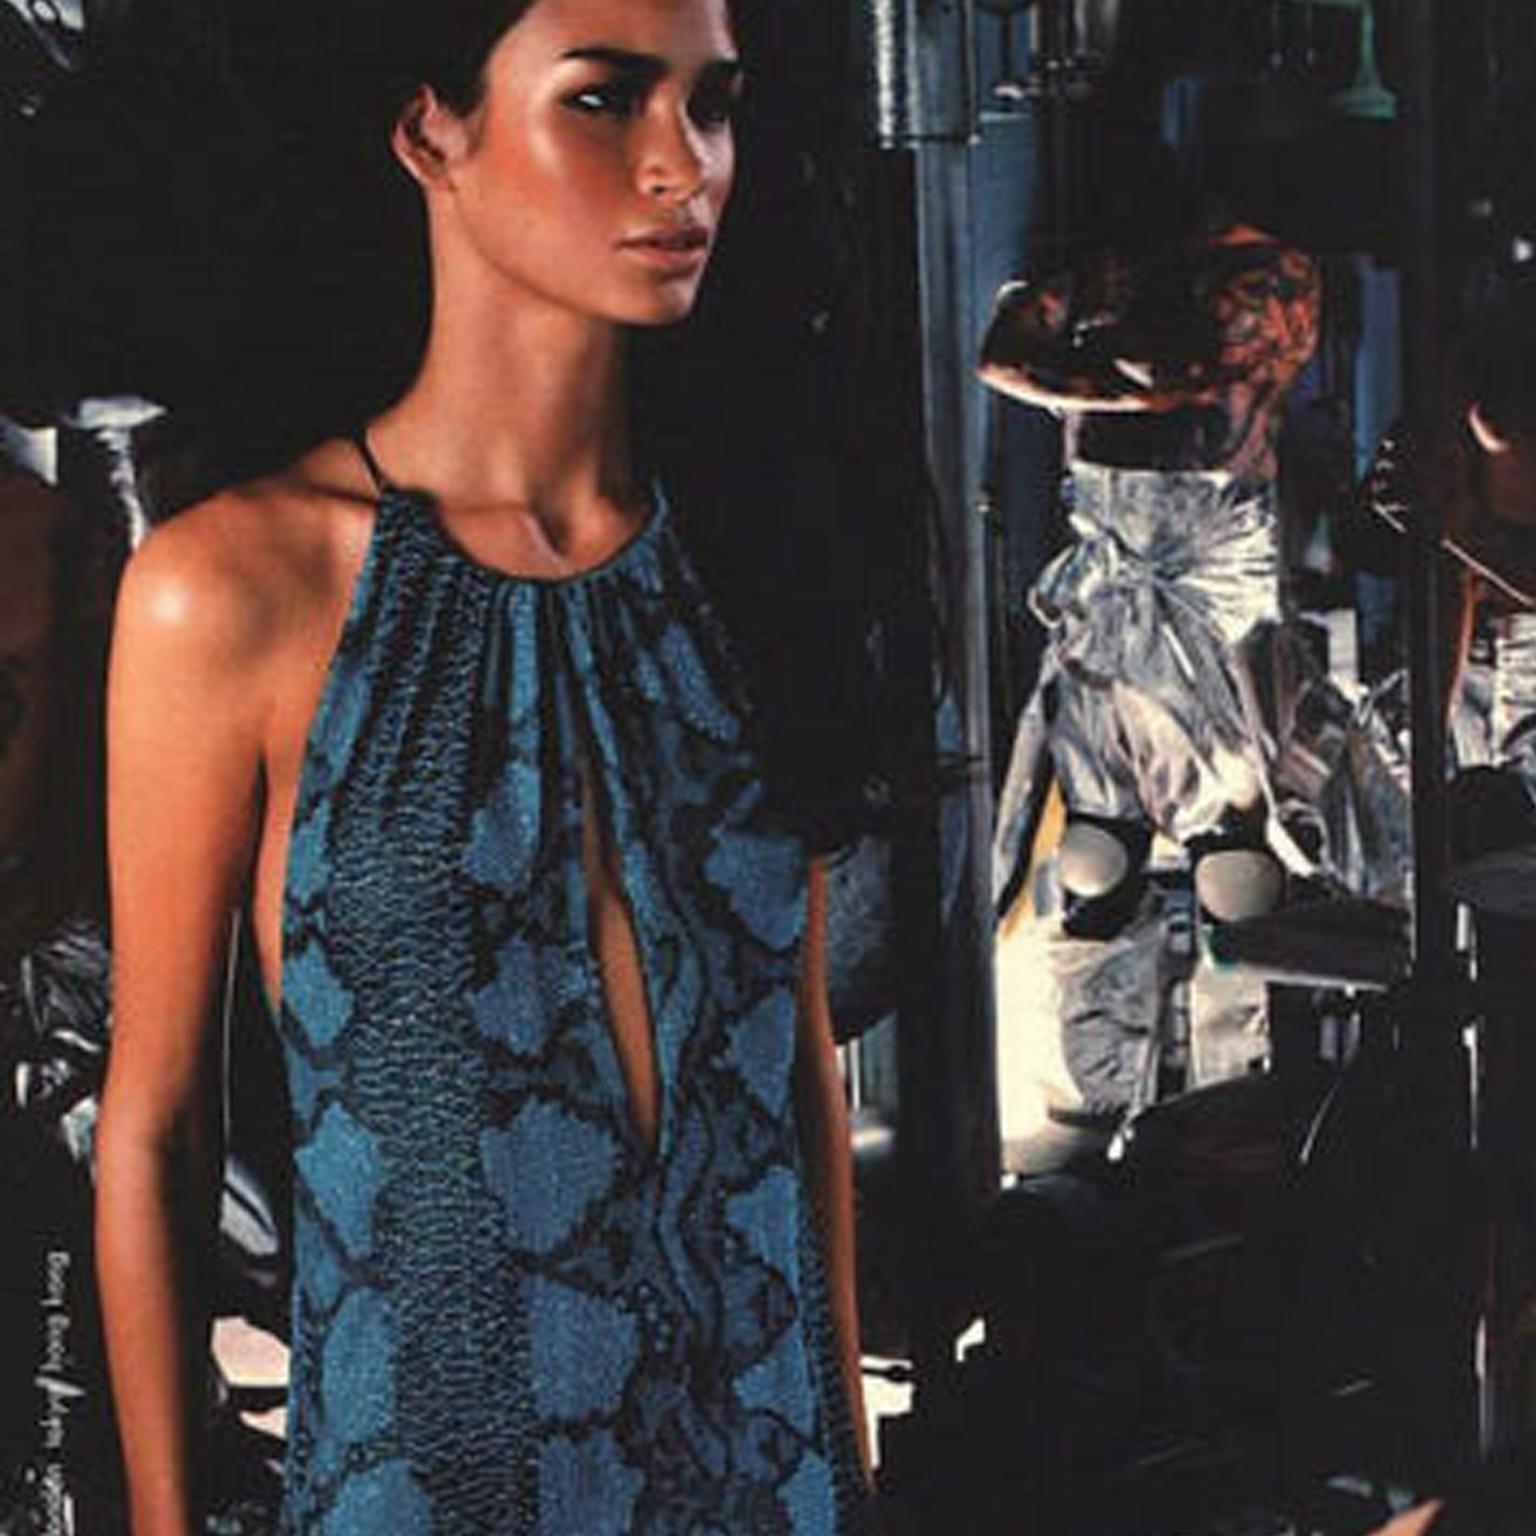 GUCCI by TOM FORD
FROM THE SPRING SUMMER 2000 RUNWAY AND CAMPAIGN
Sky blue, dark blue and black micro glass bead embroidered throughout • Python motif • Sky blue silk lining • Black leather halter neck • Clasp with gunmetal buckle signed Gucci •